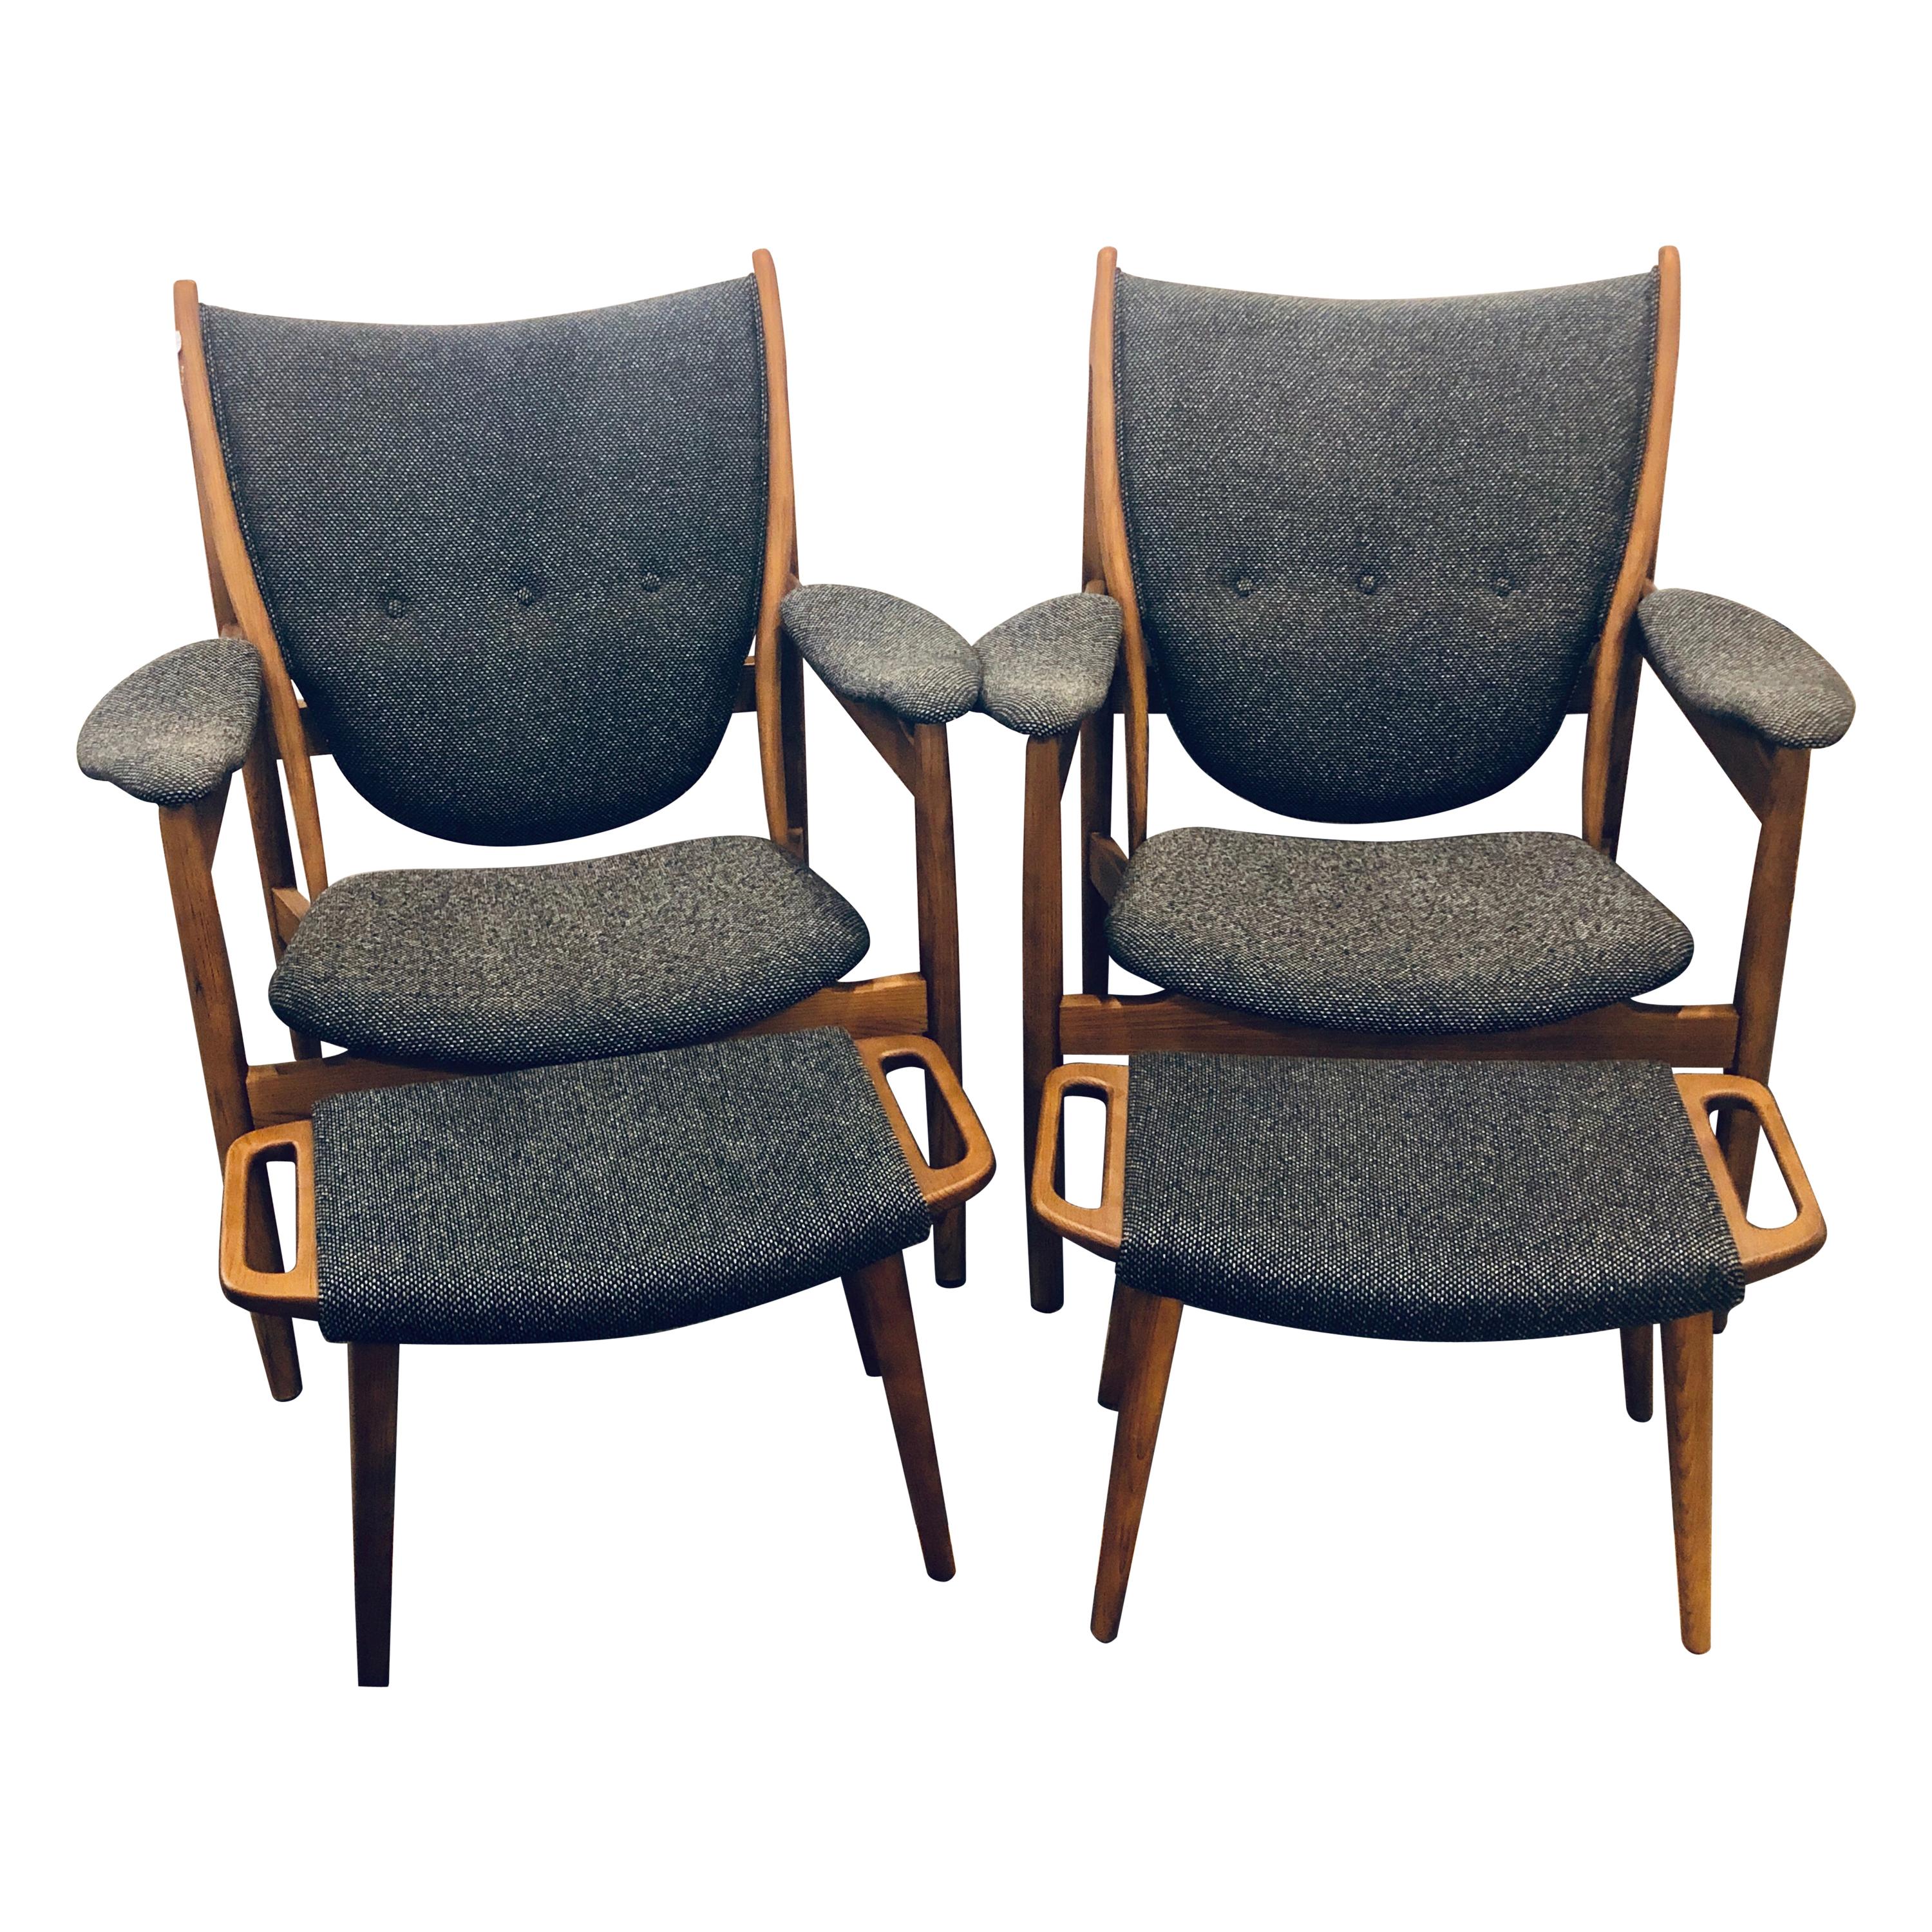 Pair of Mid-Century Modern Arm Chairs with Ottomans